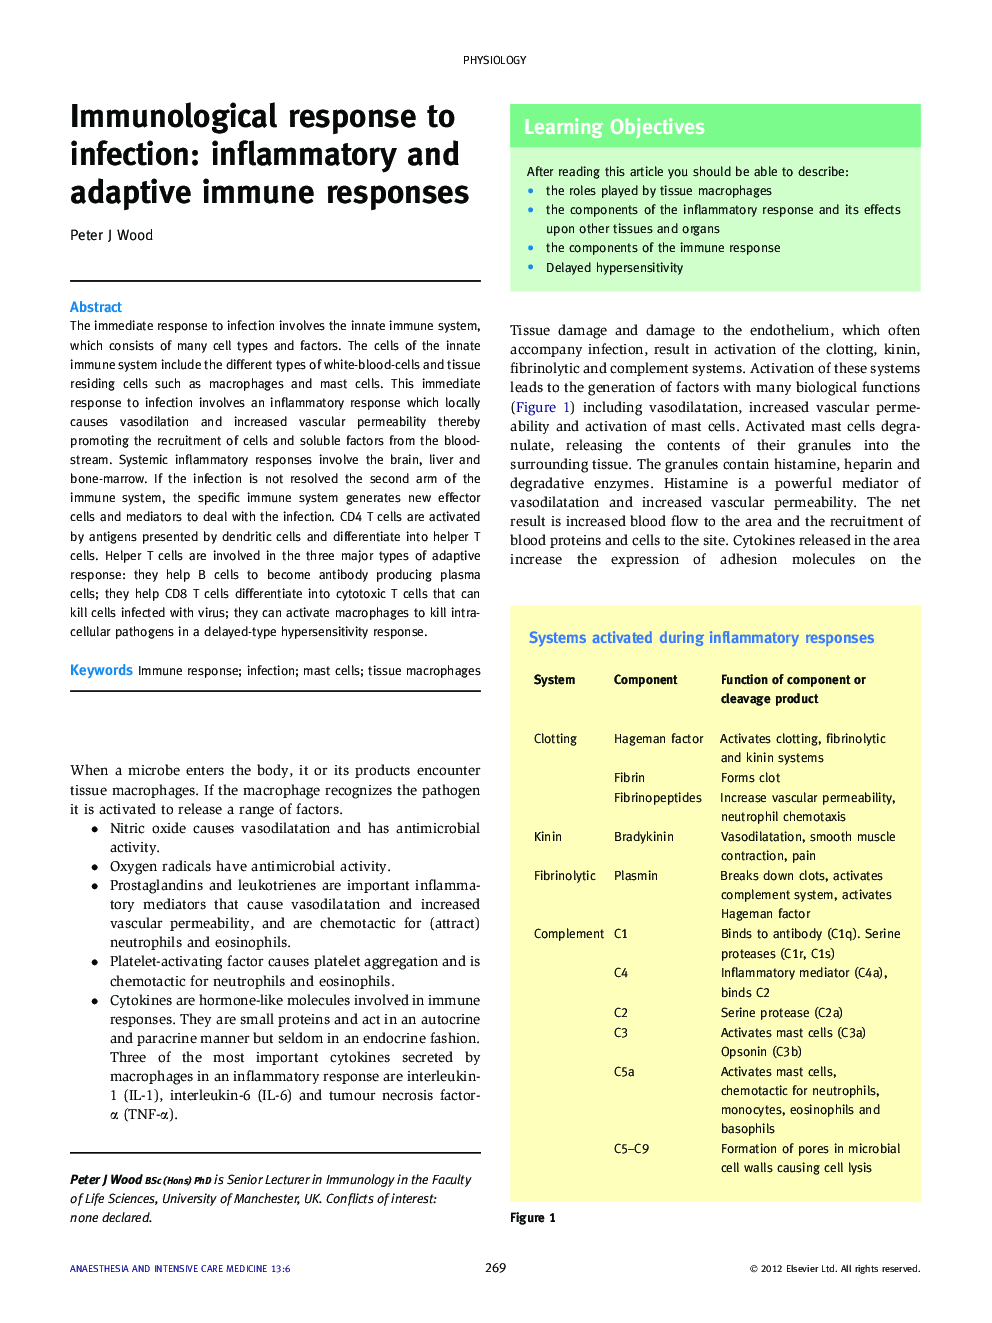 Immunological response to infection: inflammatory and adaptive immune responses